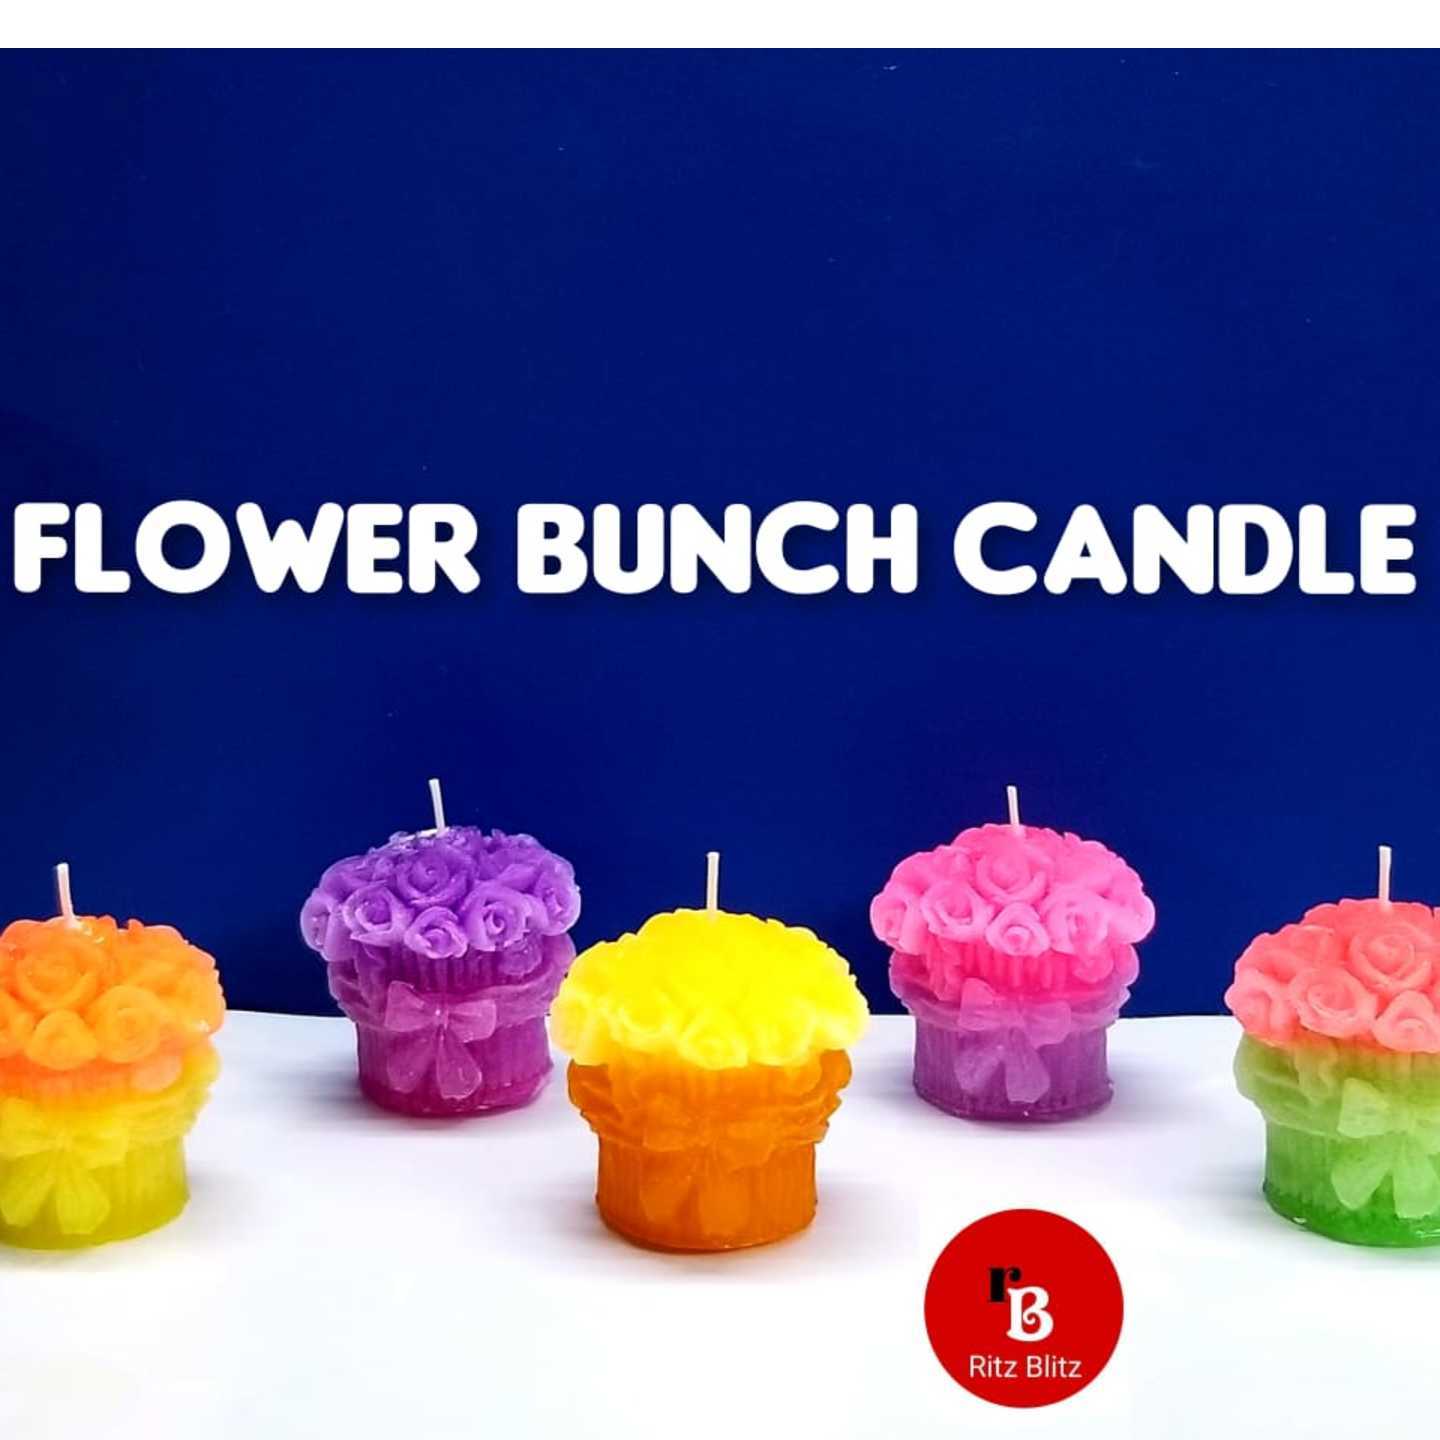 Flower Bunch Candle